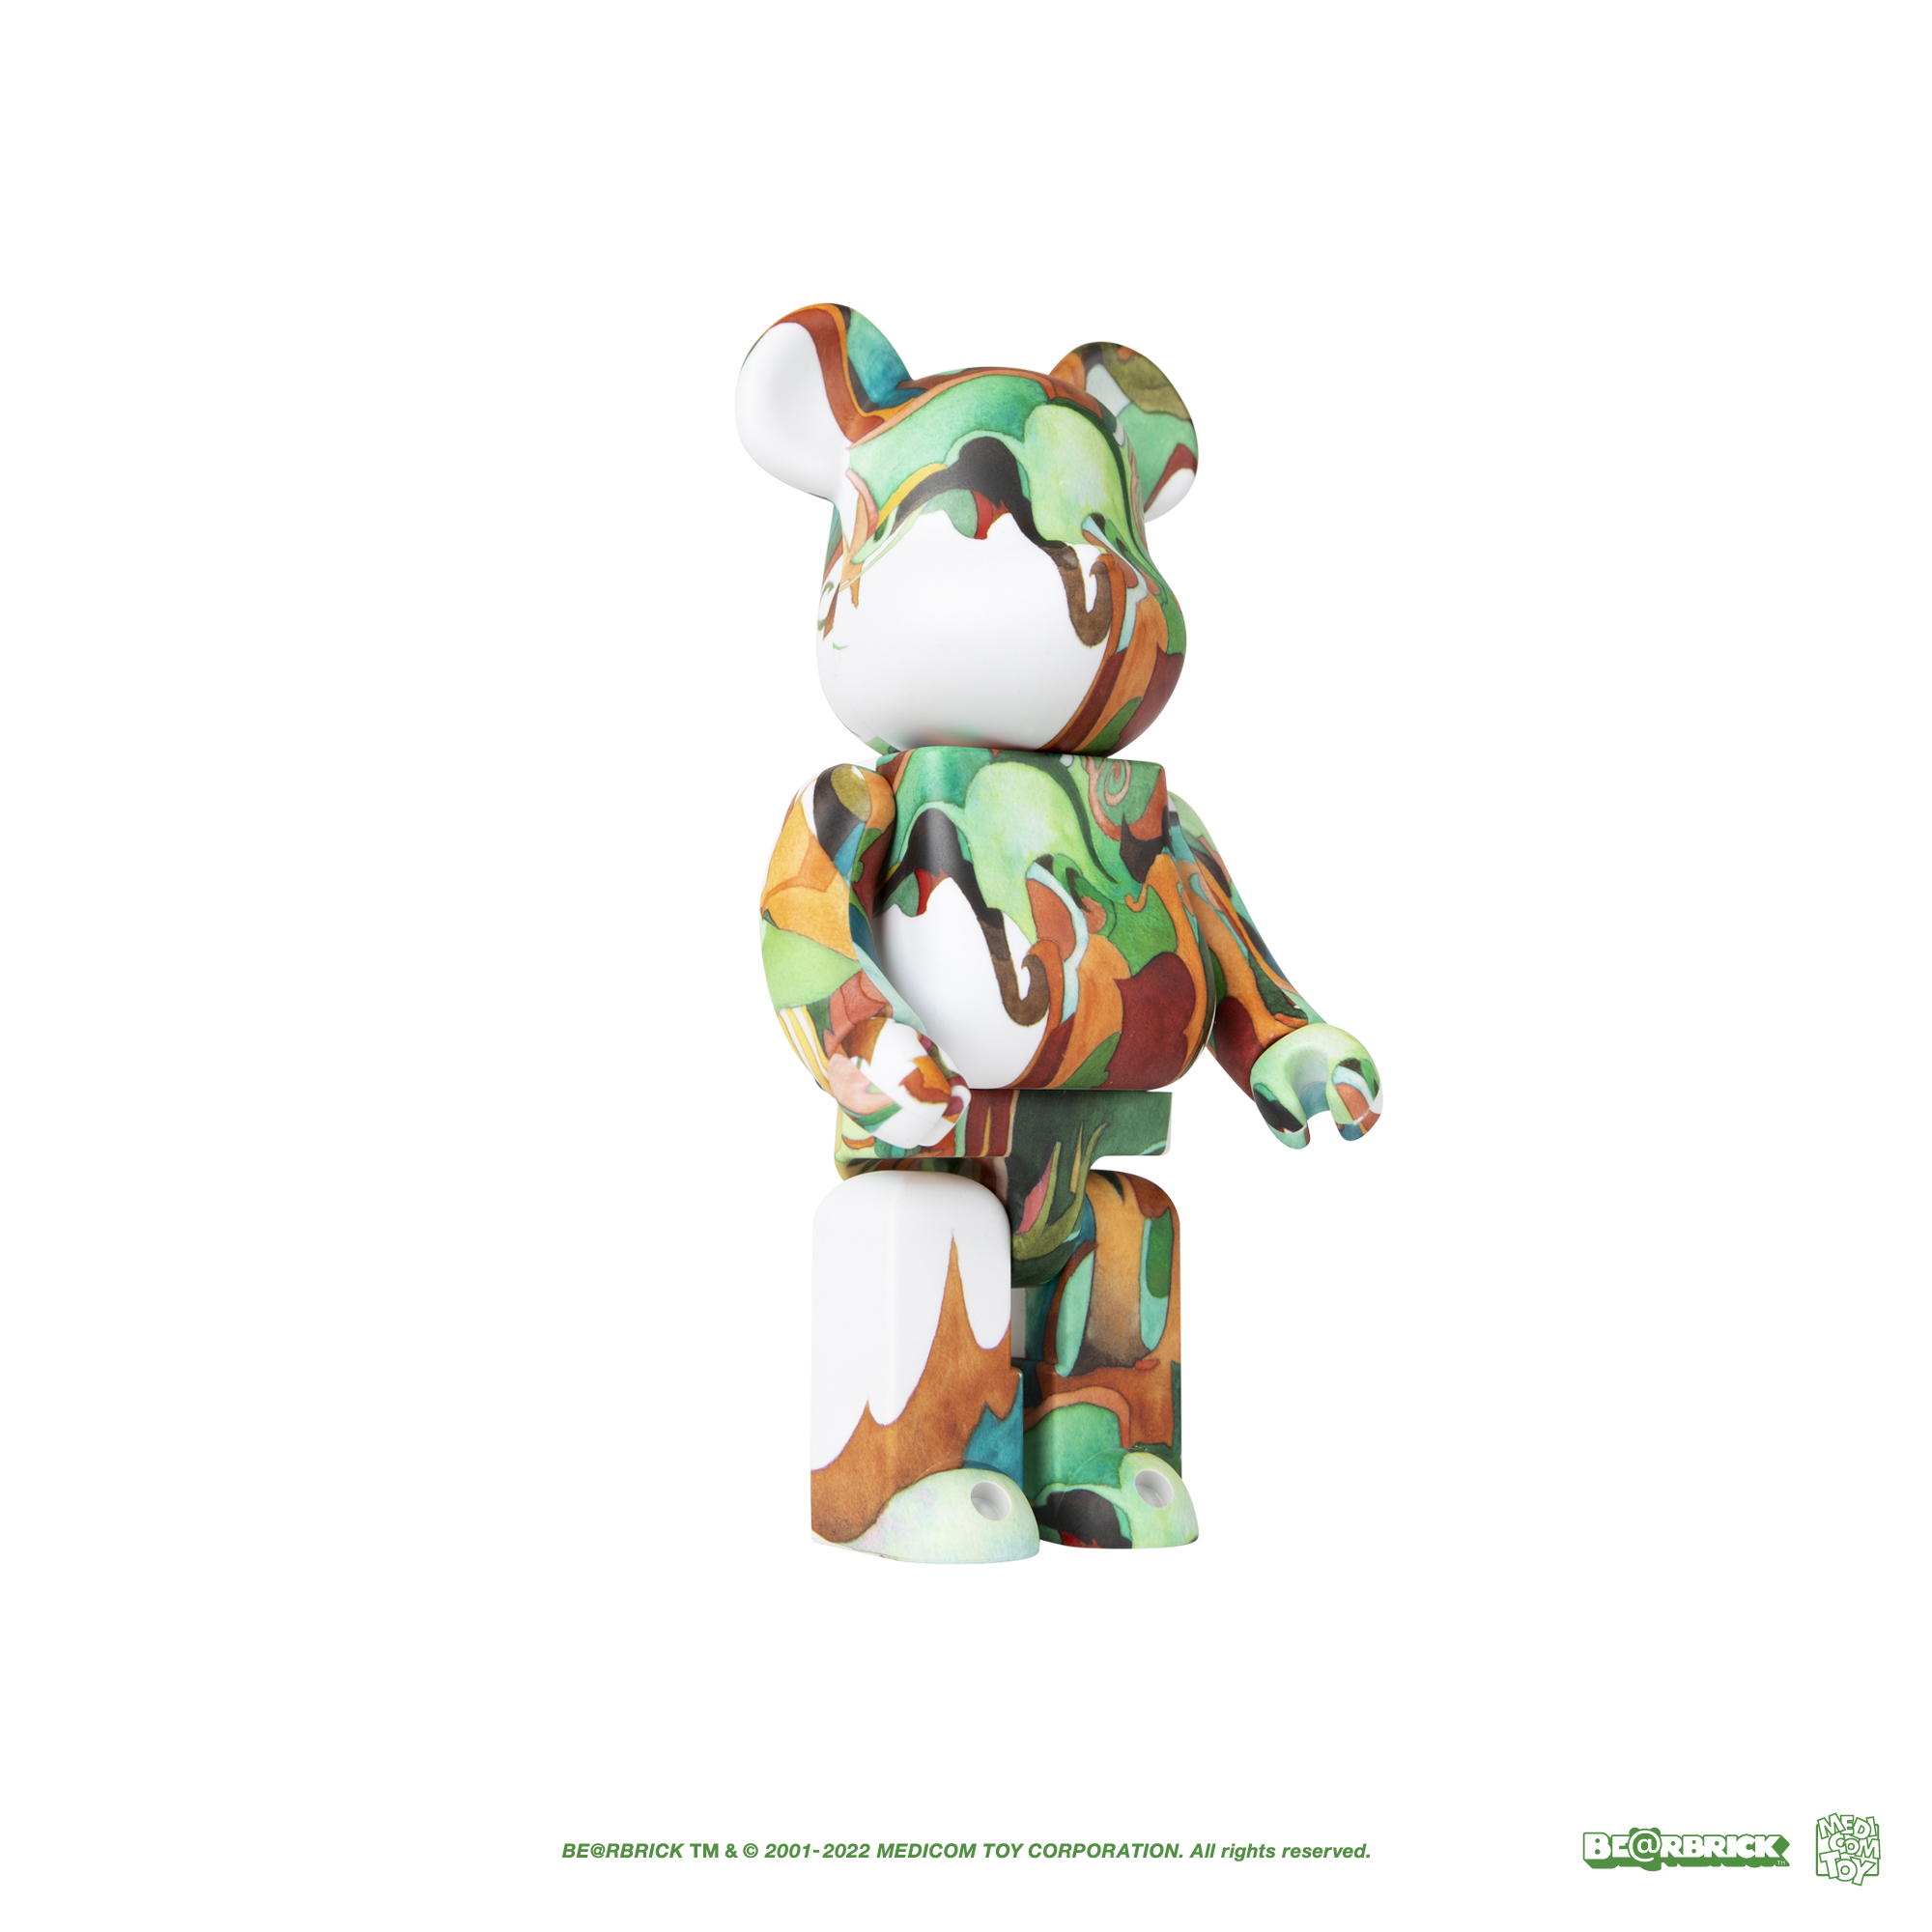 Second Collaboration Between BE@RBRICK and Music Producer Nujabes